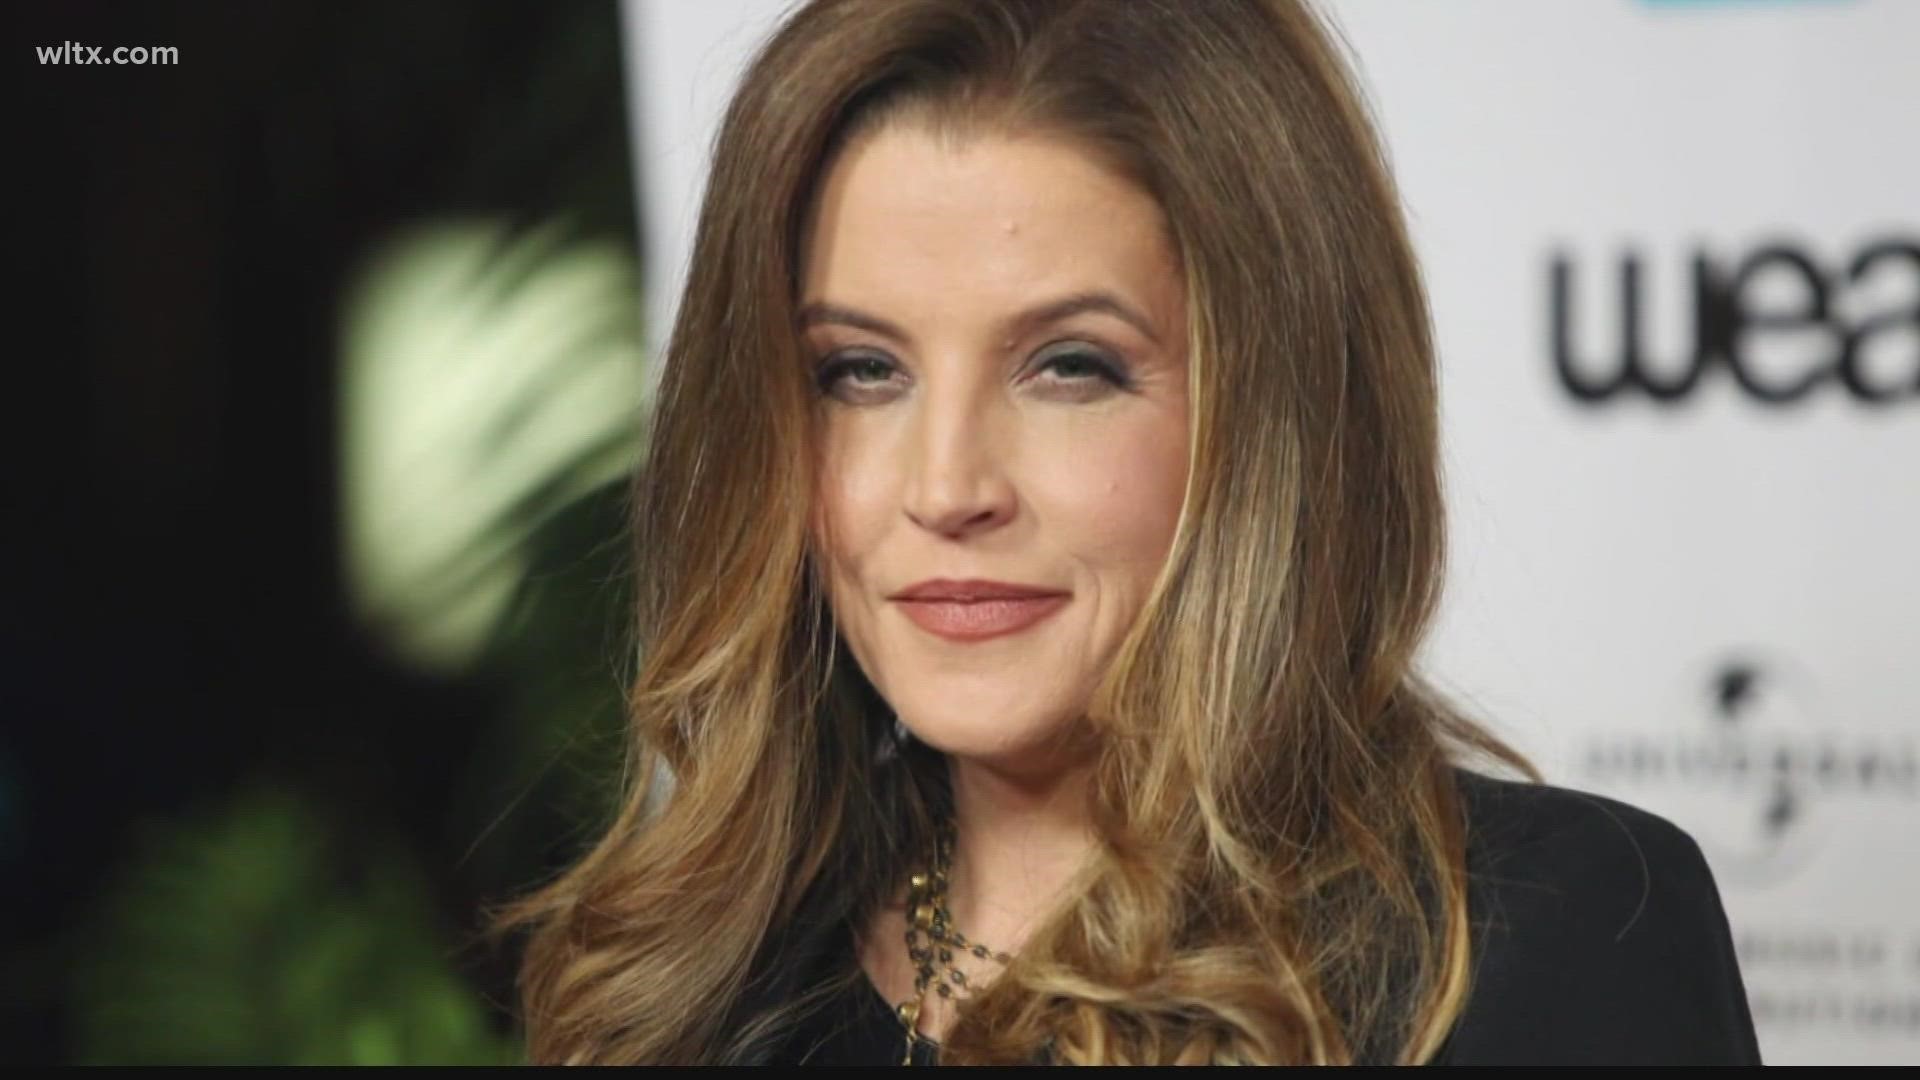 A public memorial service for Lisa Marie Presley will be held on Jan. 22 at Graceland, the famed Memphis home of her father, Elvis Presley.